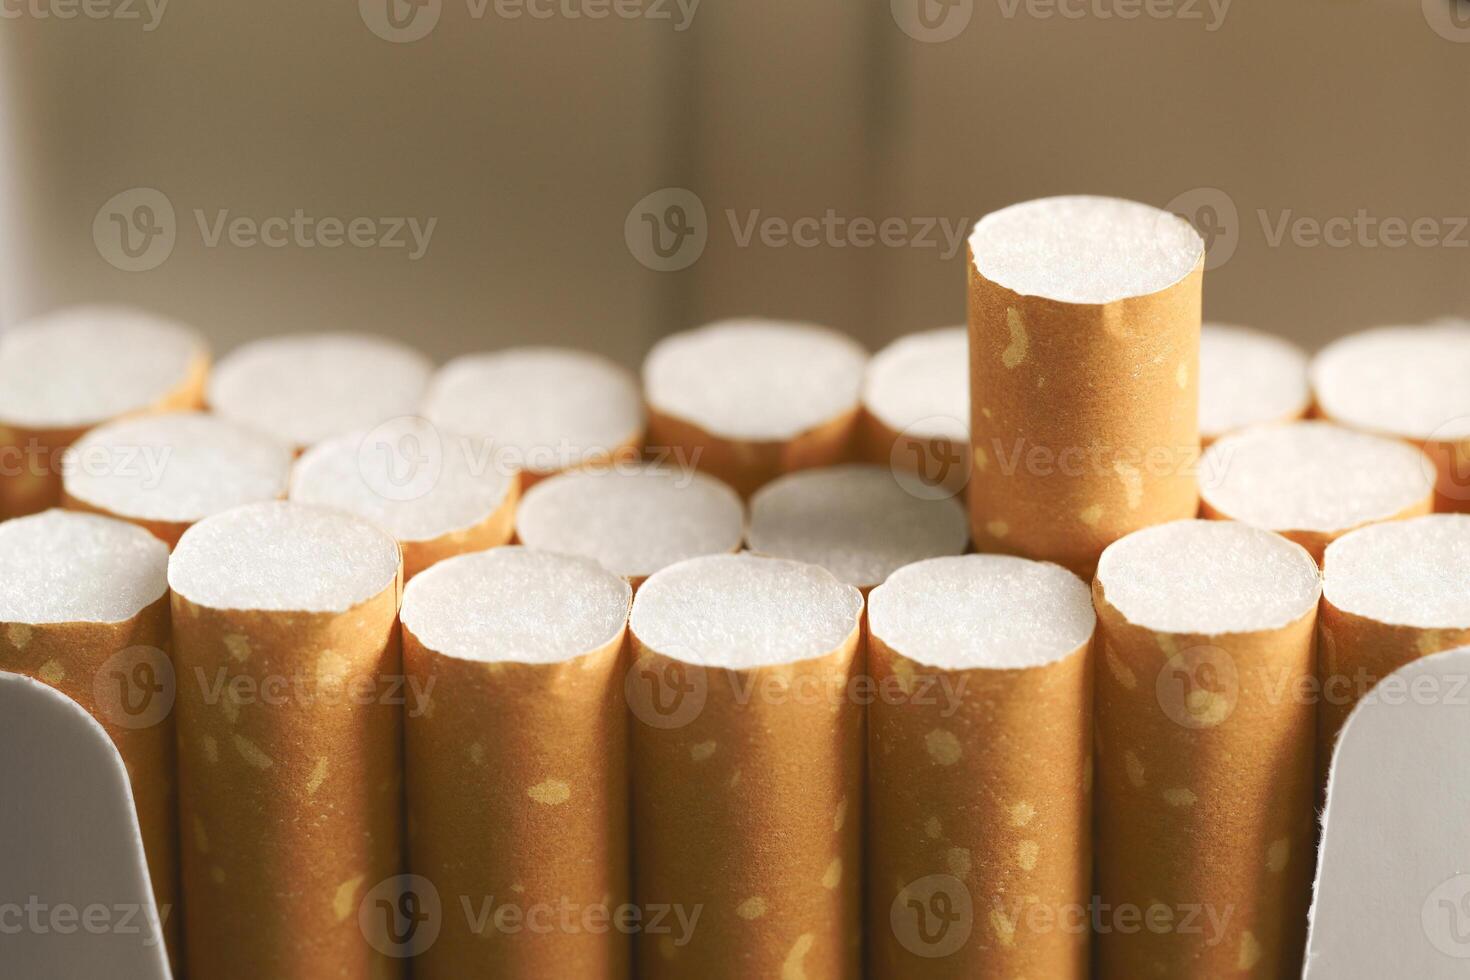 peel it off Cigarette pack prepare smoking on white wooden background. Packing line up. photo filters Natural light